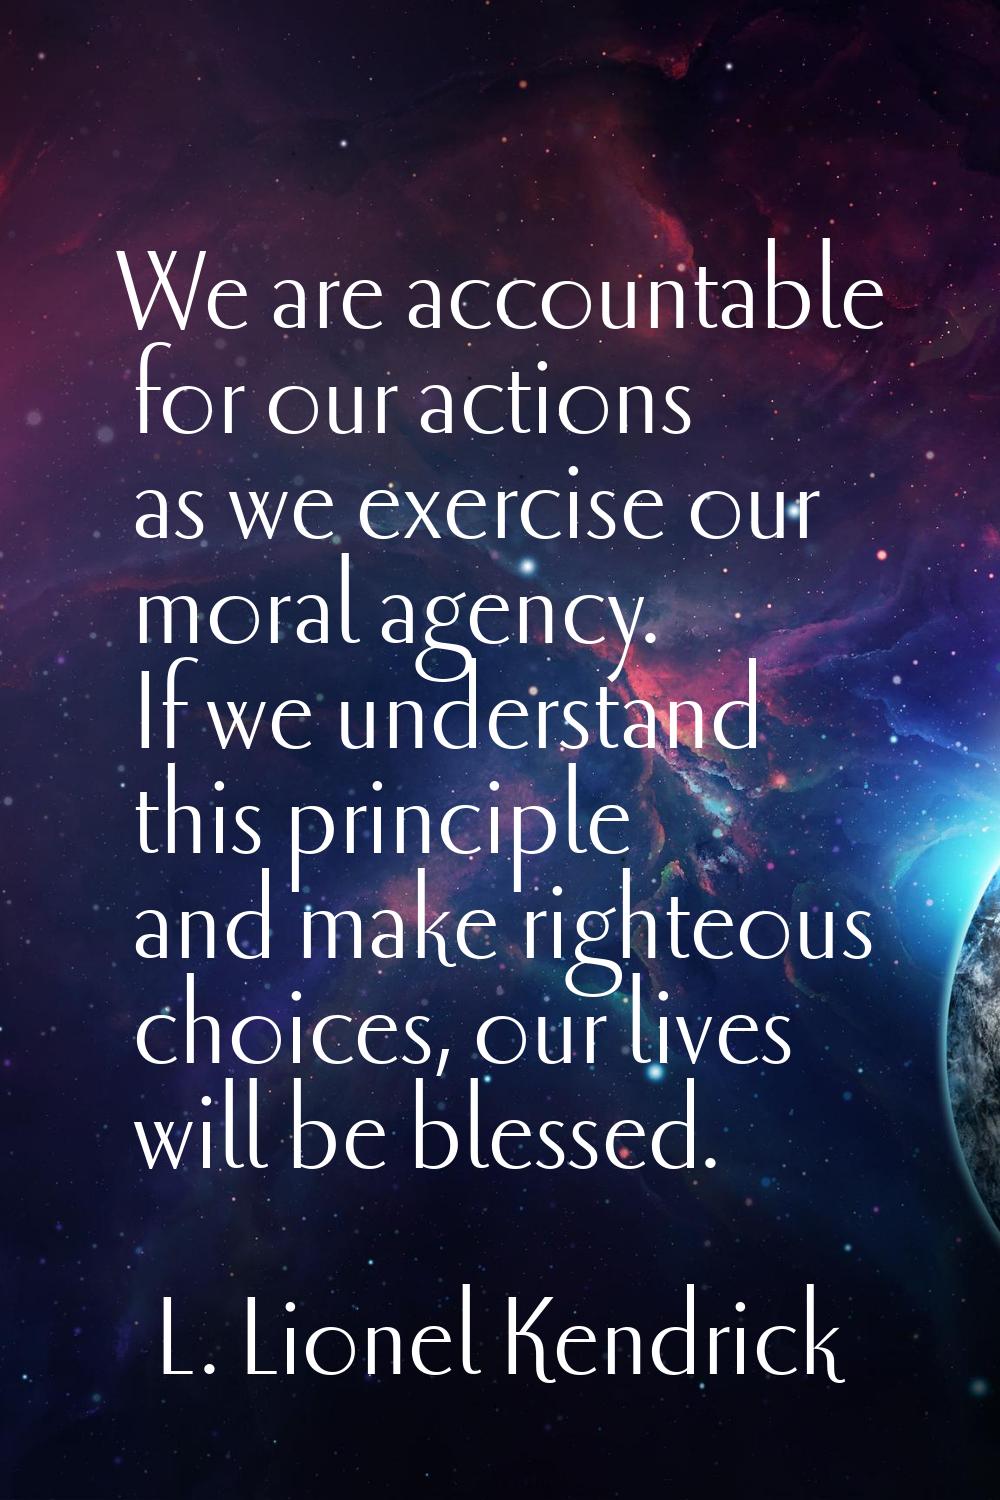 We are accountable for our actions as we exercise our moral agency. If we understand this principle